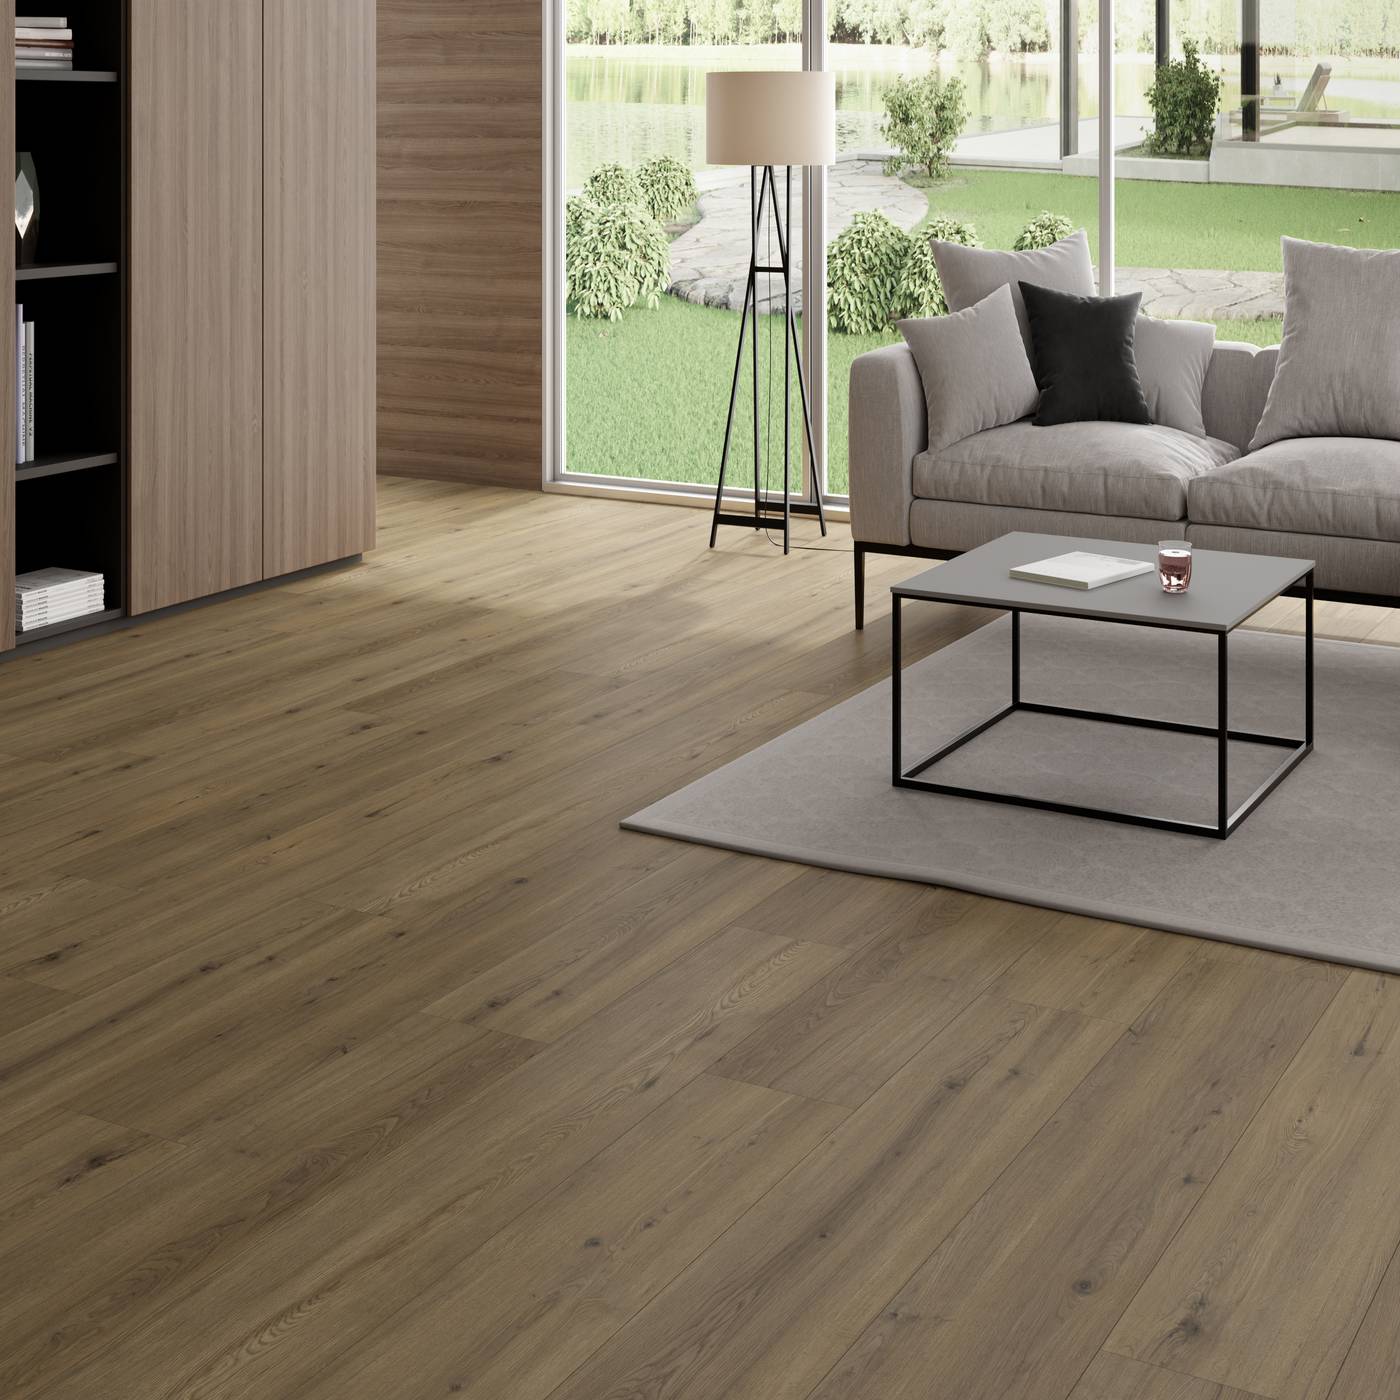 7 Wood Flooring Problems to Look Out Fo